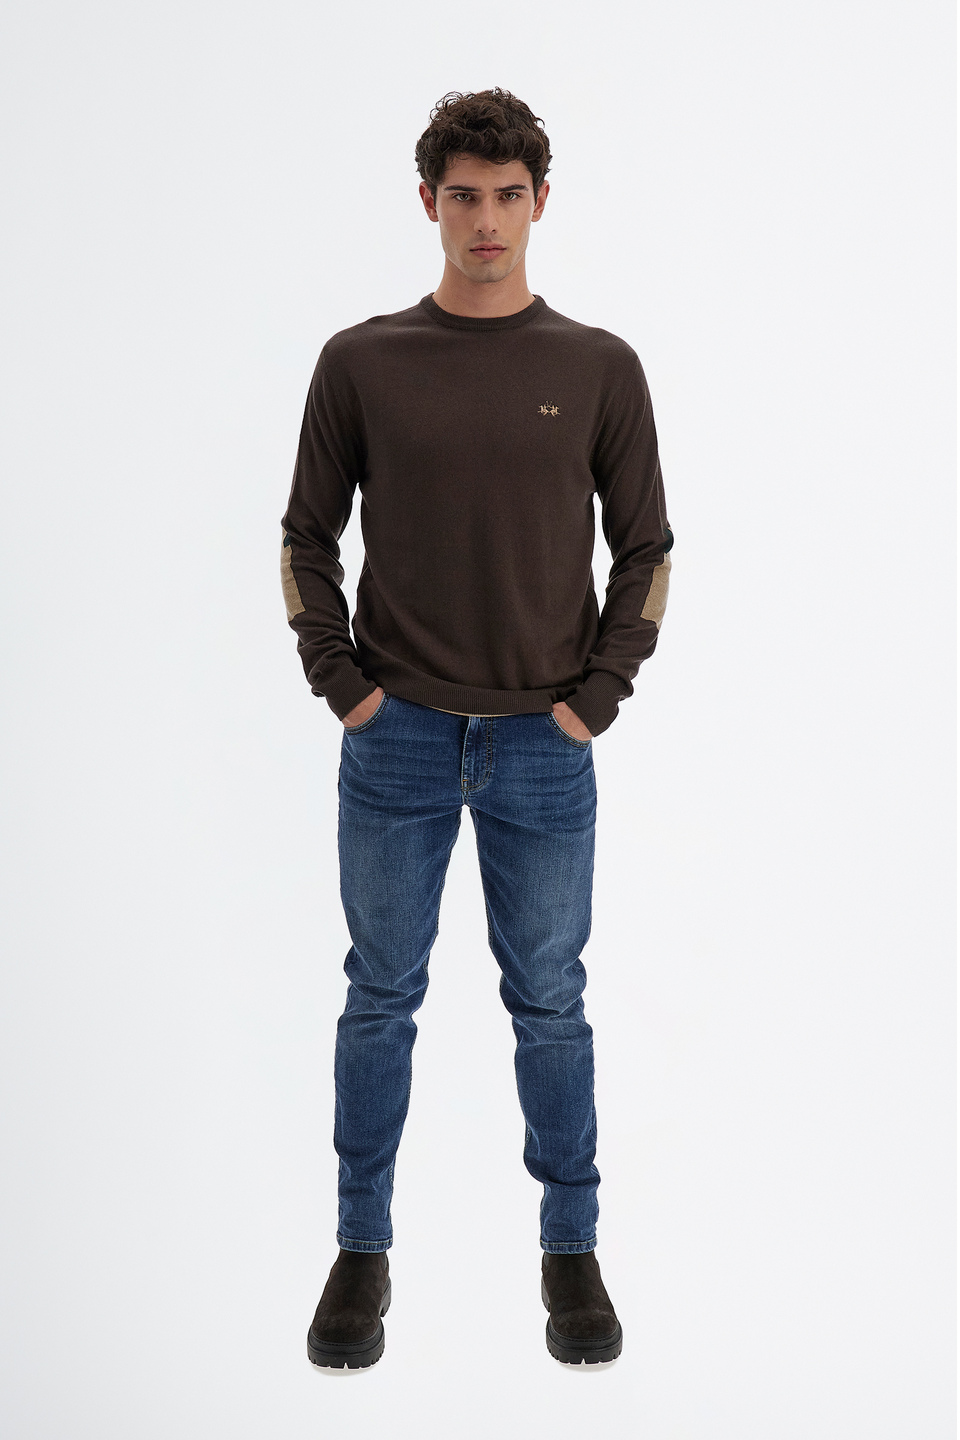 Men’s knit sweater with long sleeves in cotton blend wool regular fit crew neck | La Martina - Official Online Shop